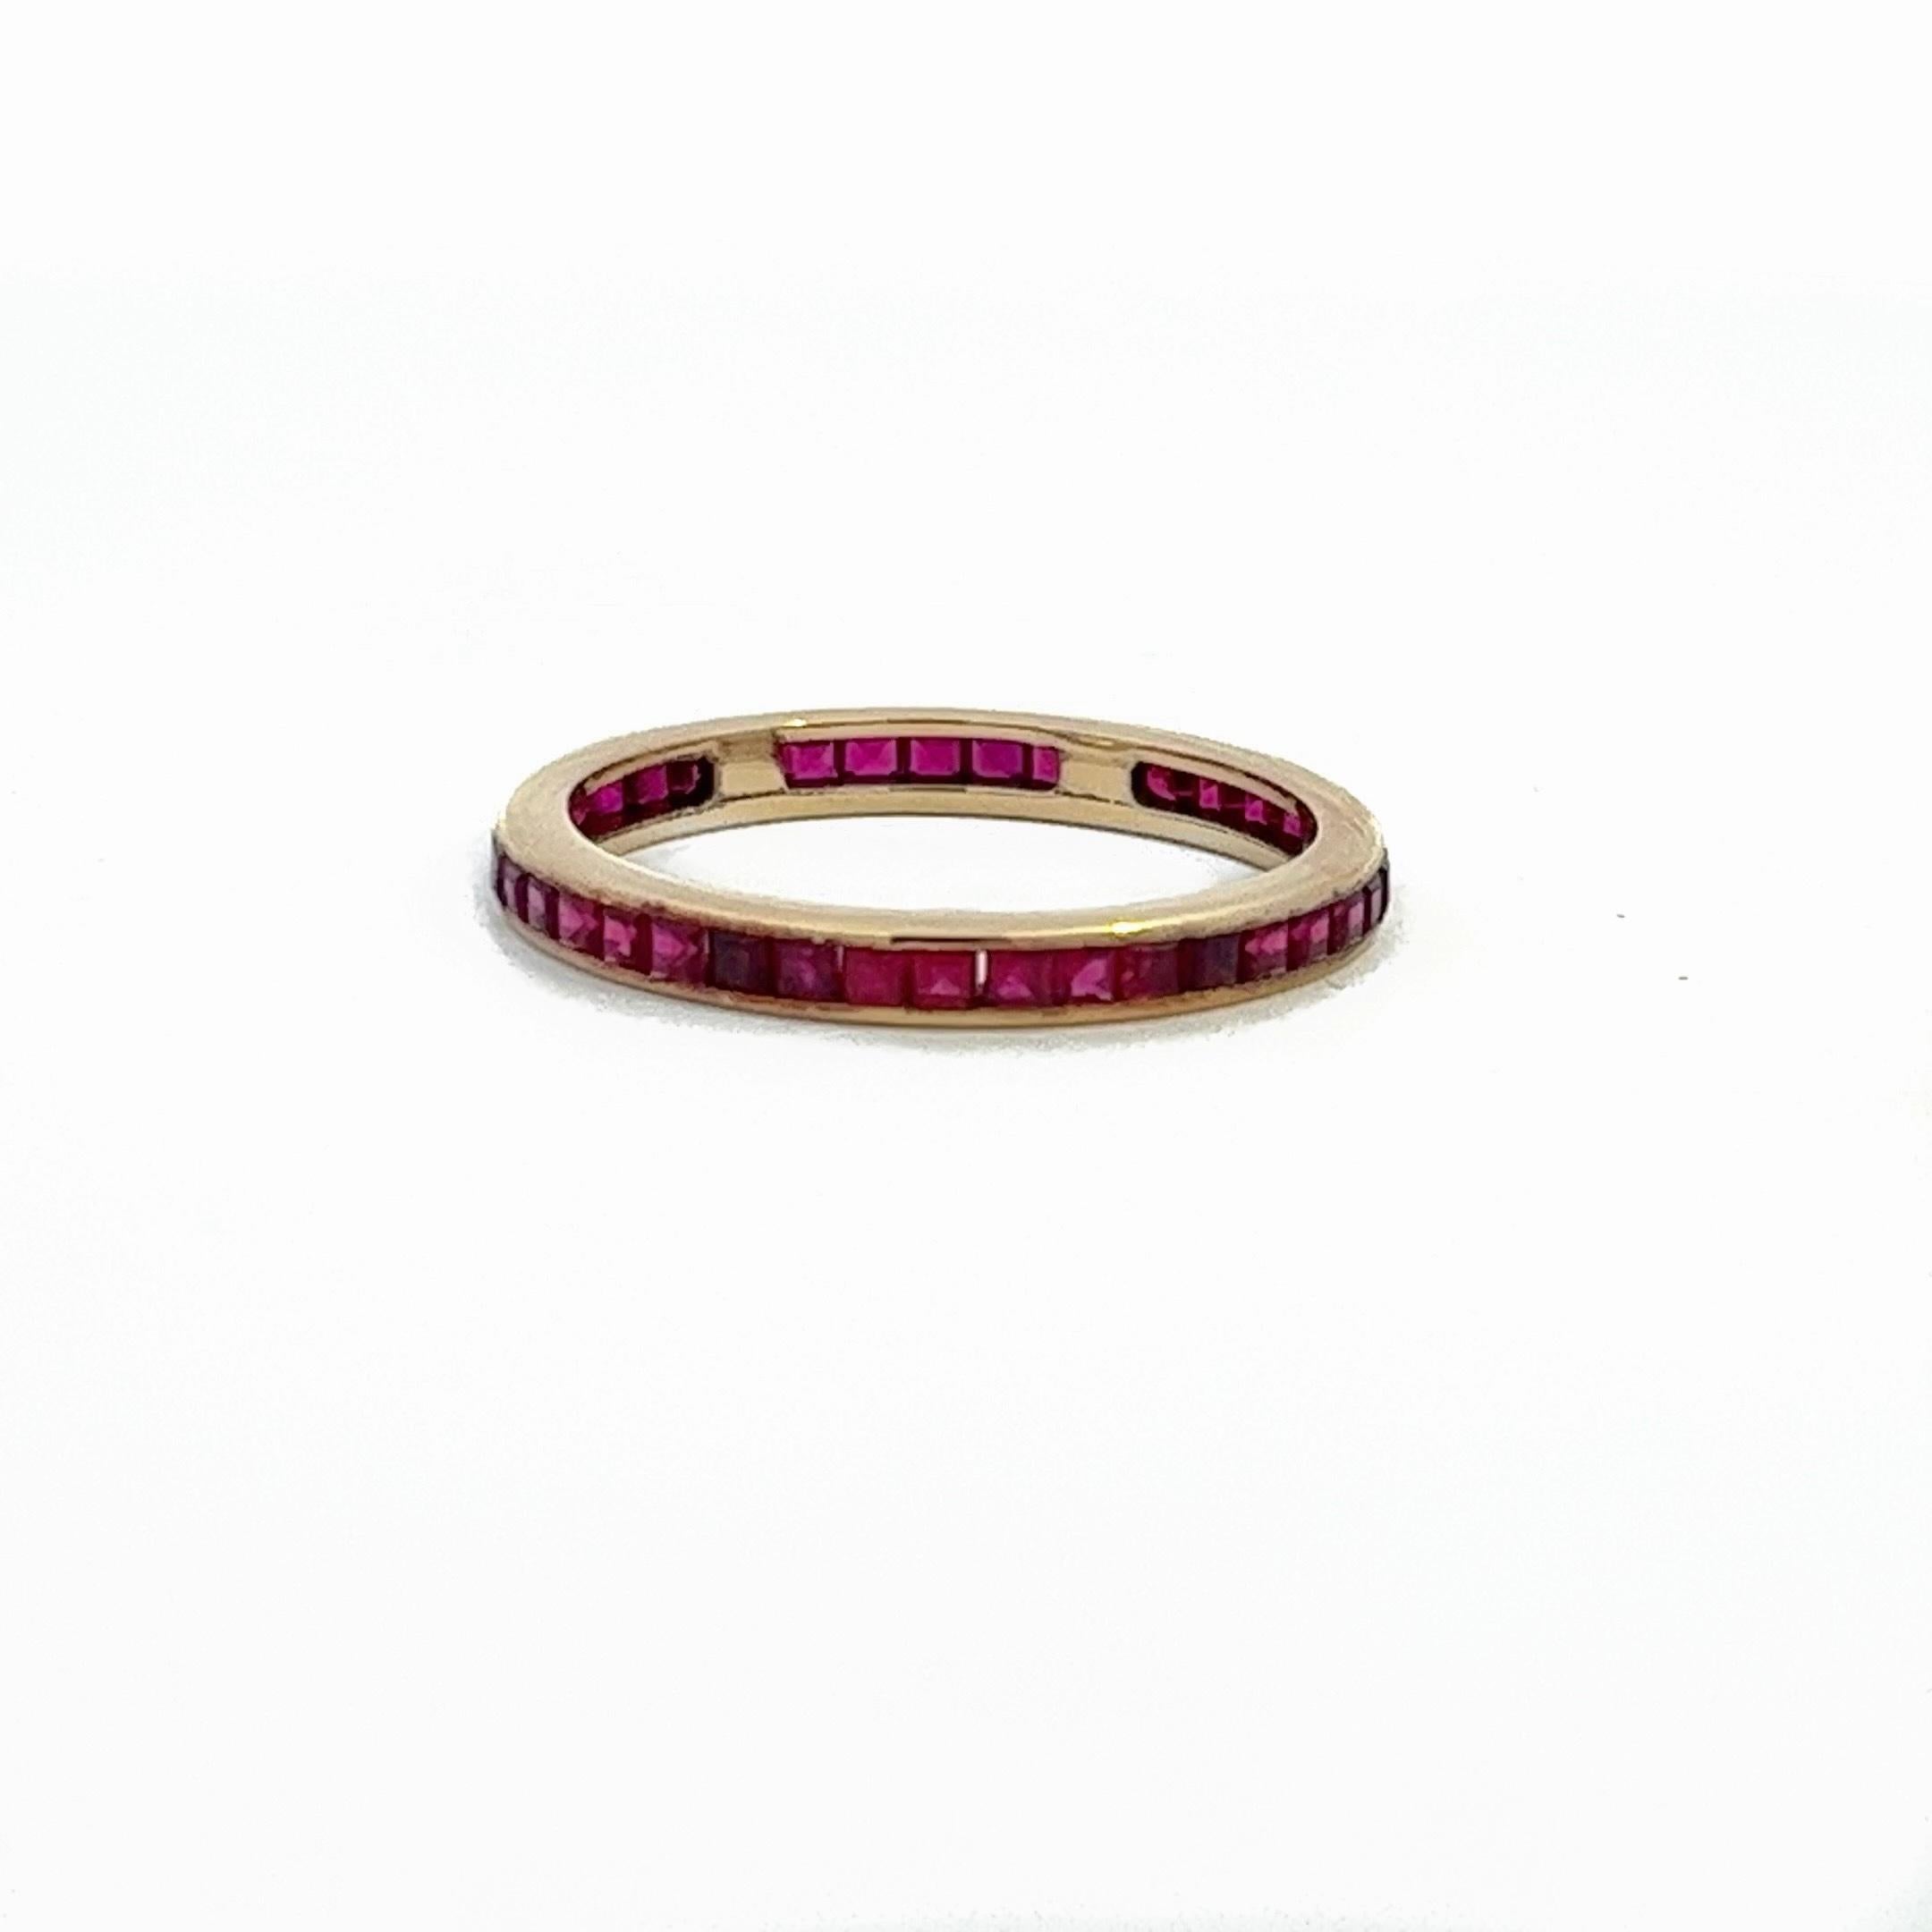 This is a dainty and elegant French cut Ruby eternity band crafted in 14 karat yellow gold. The band features 40 rubies showcasing hues of burgundy, pink, and red. The combination of the precious gemstones and gold creates a captivating and